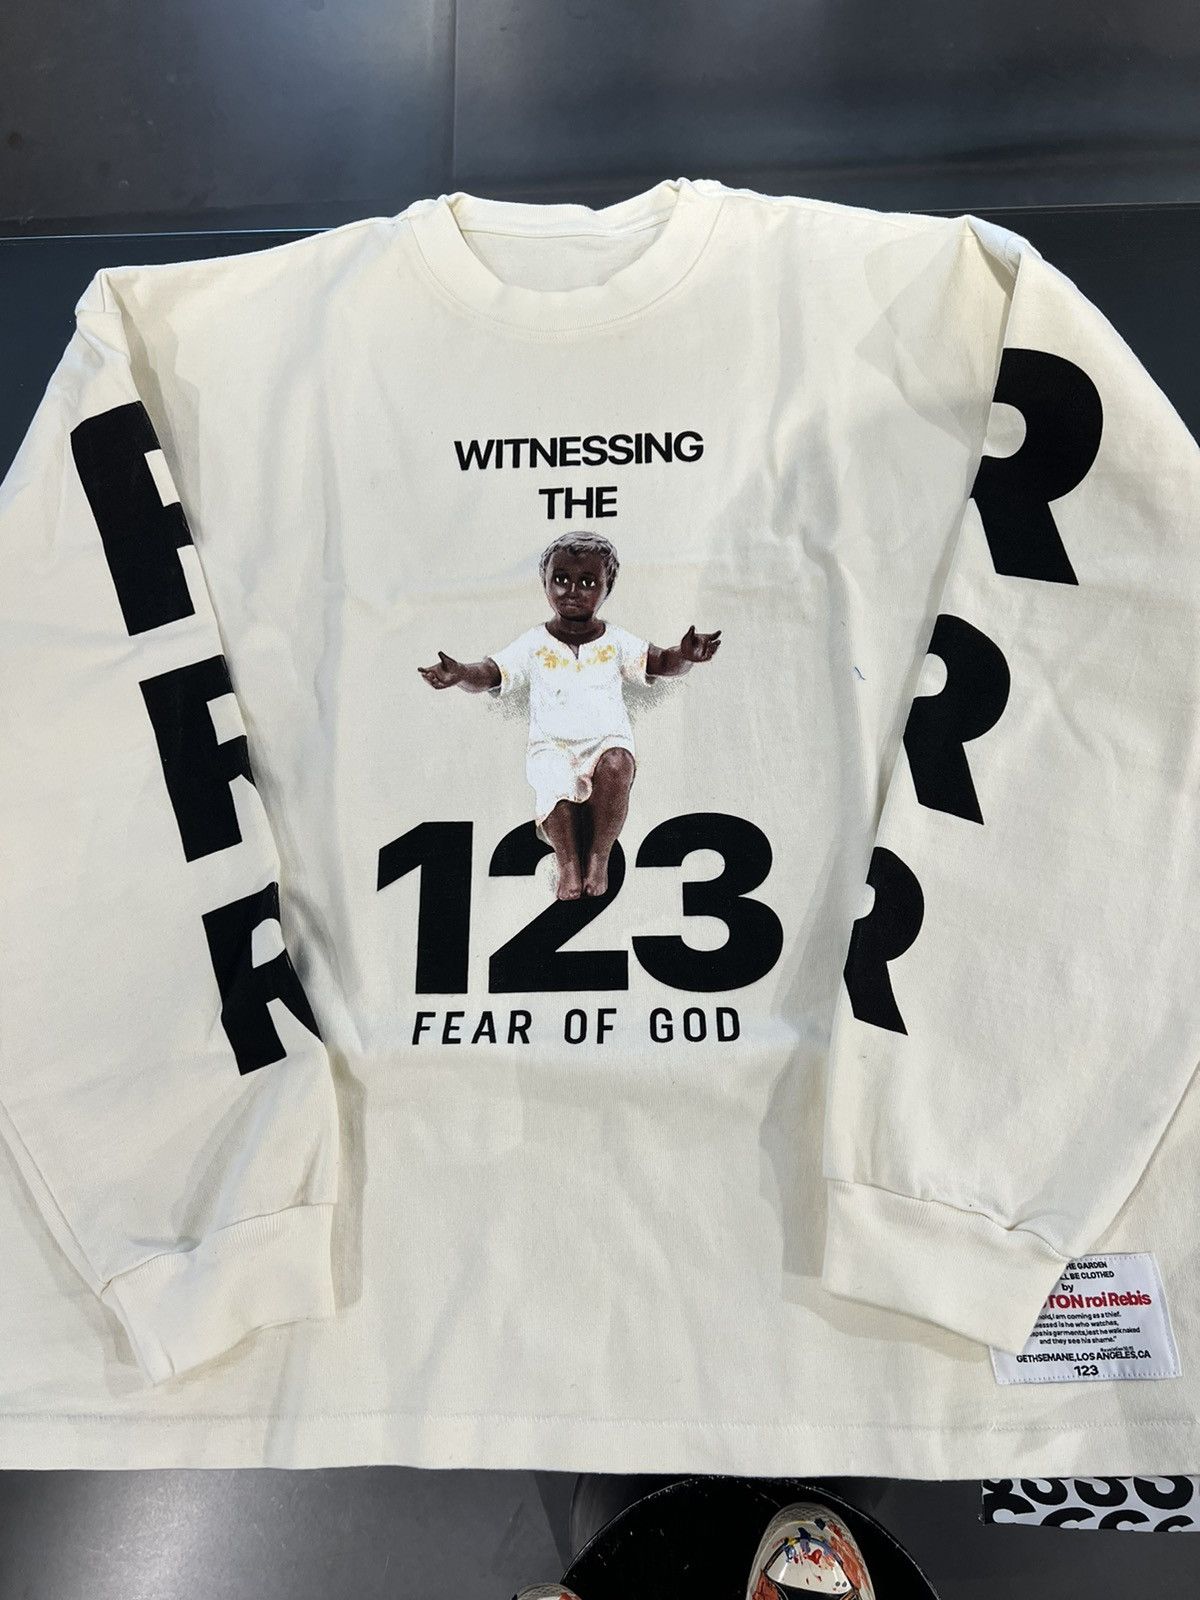 Fear of God Fear of God x RRR123 The Witness L/S | Grailed